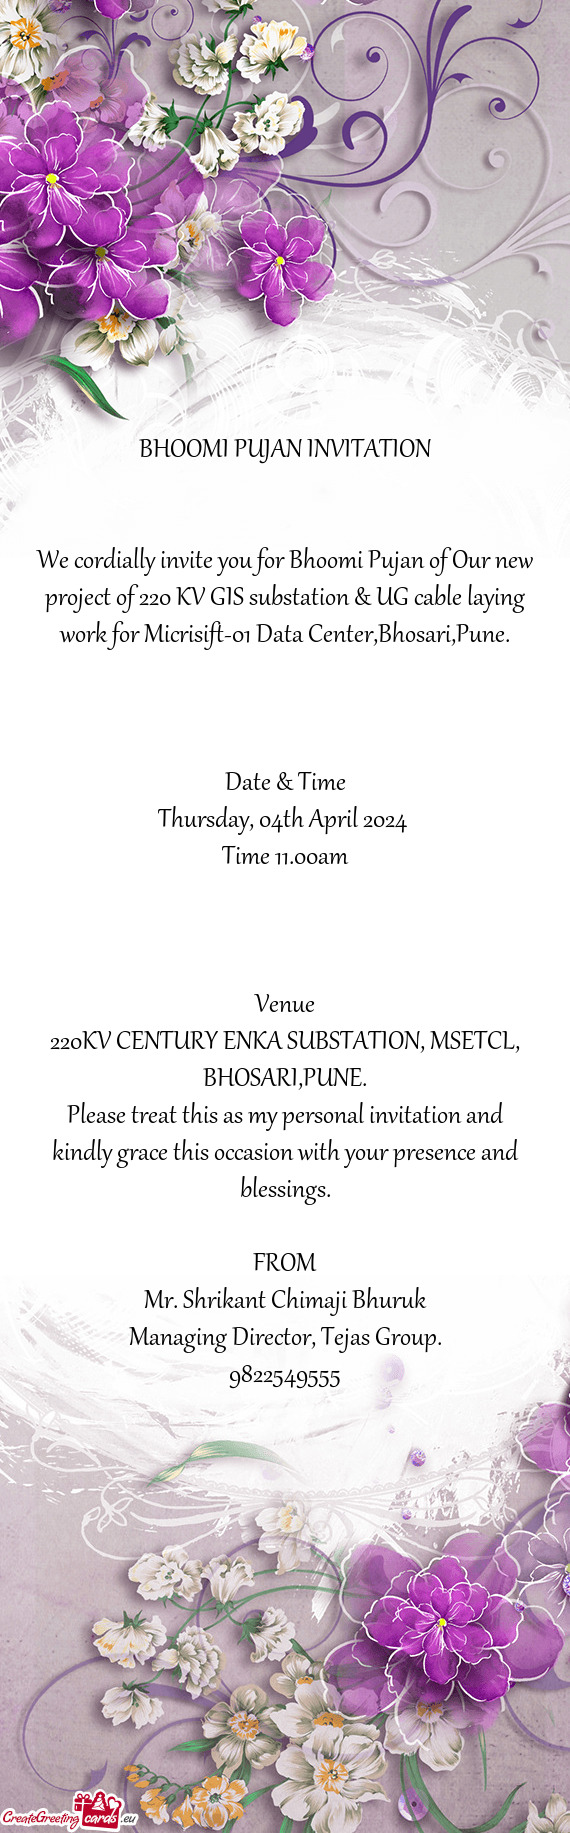 We cordially invite you for Bhoomi Pujan of Our new project of 220 KV GIS substation & UG cable layi